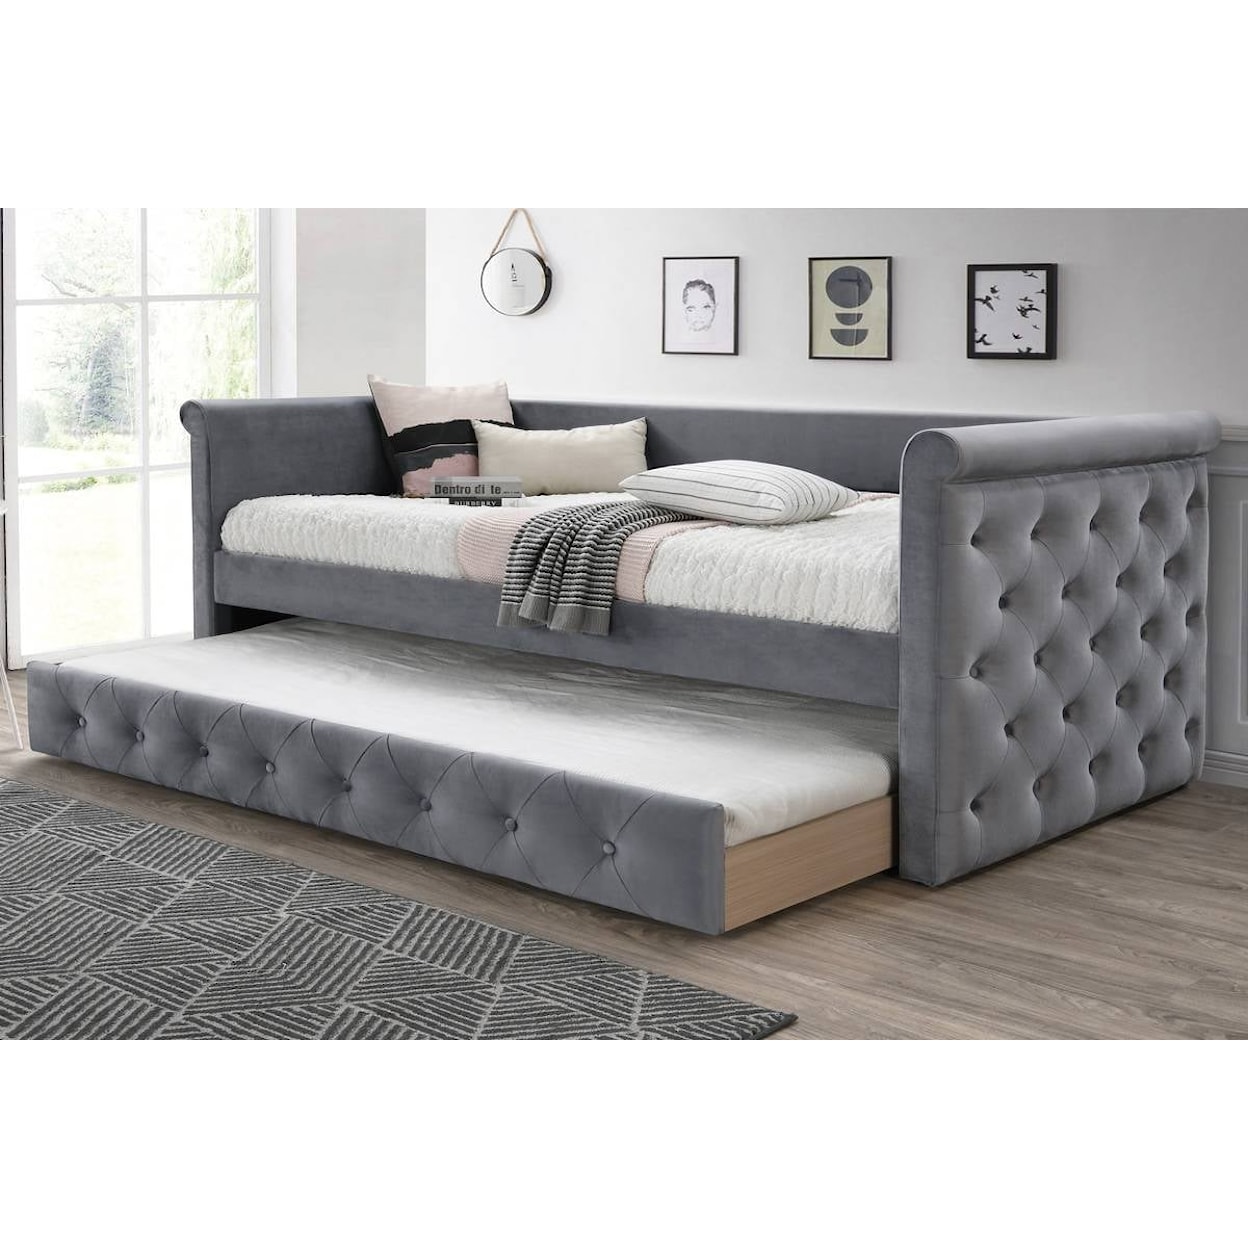 Poundex Tufted Grey Day Bed TUFTED GREY DAY BED W/ TRUNDLE |